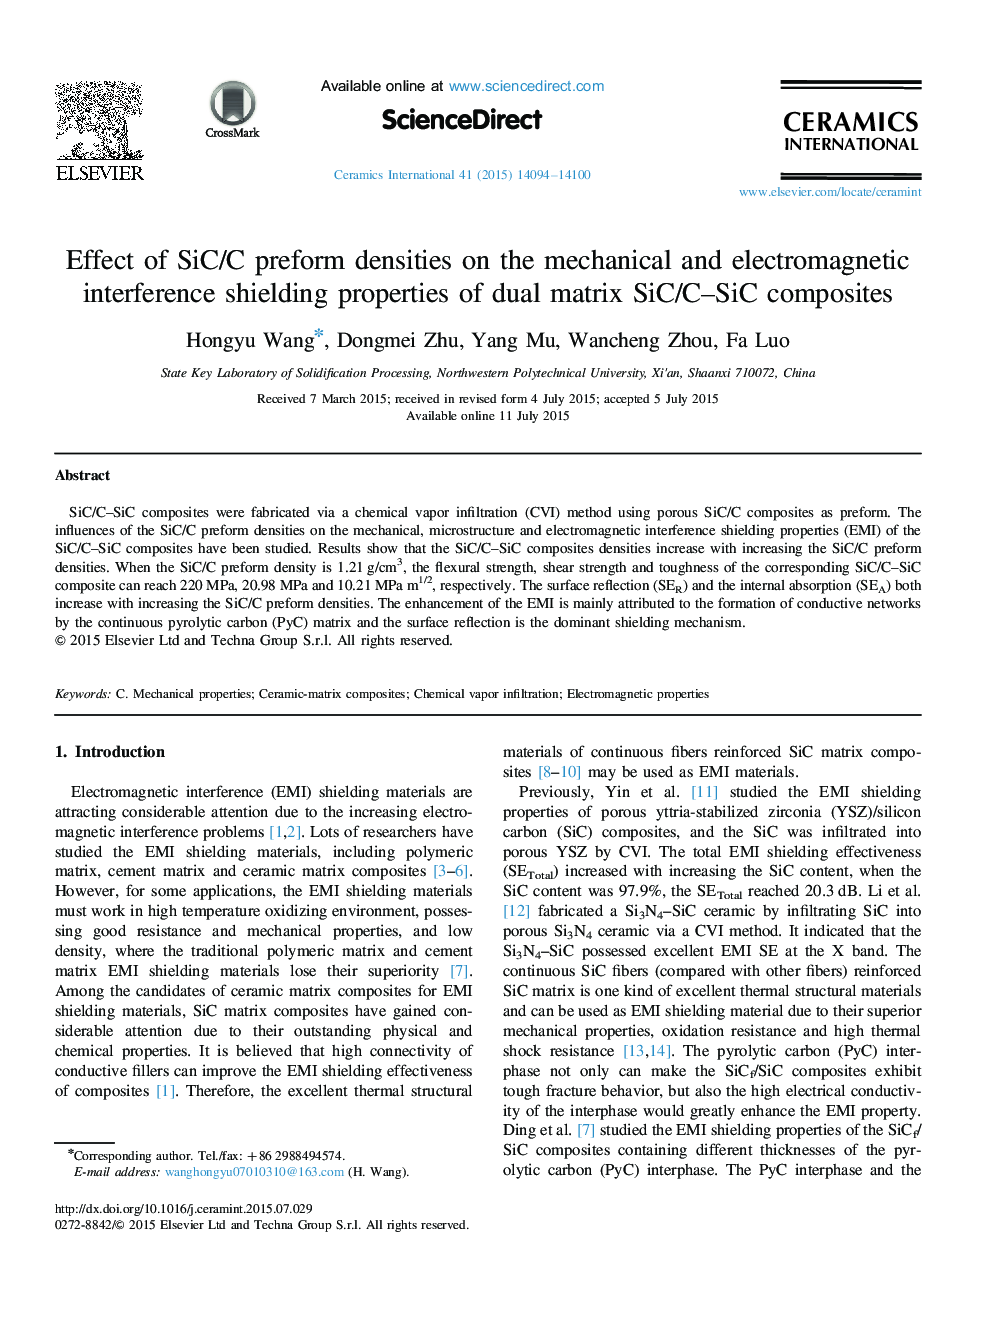 Effect of SiC/C preform densities on the mechanical and electromagnetic interference shielding properties of dual matrix SiC/C–SiC composites